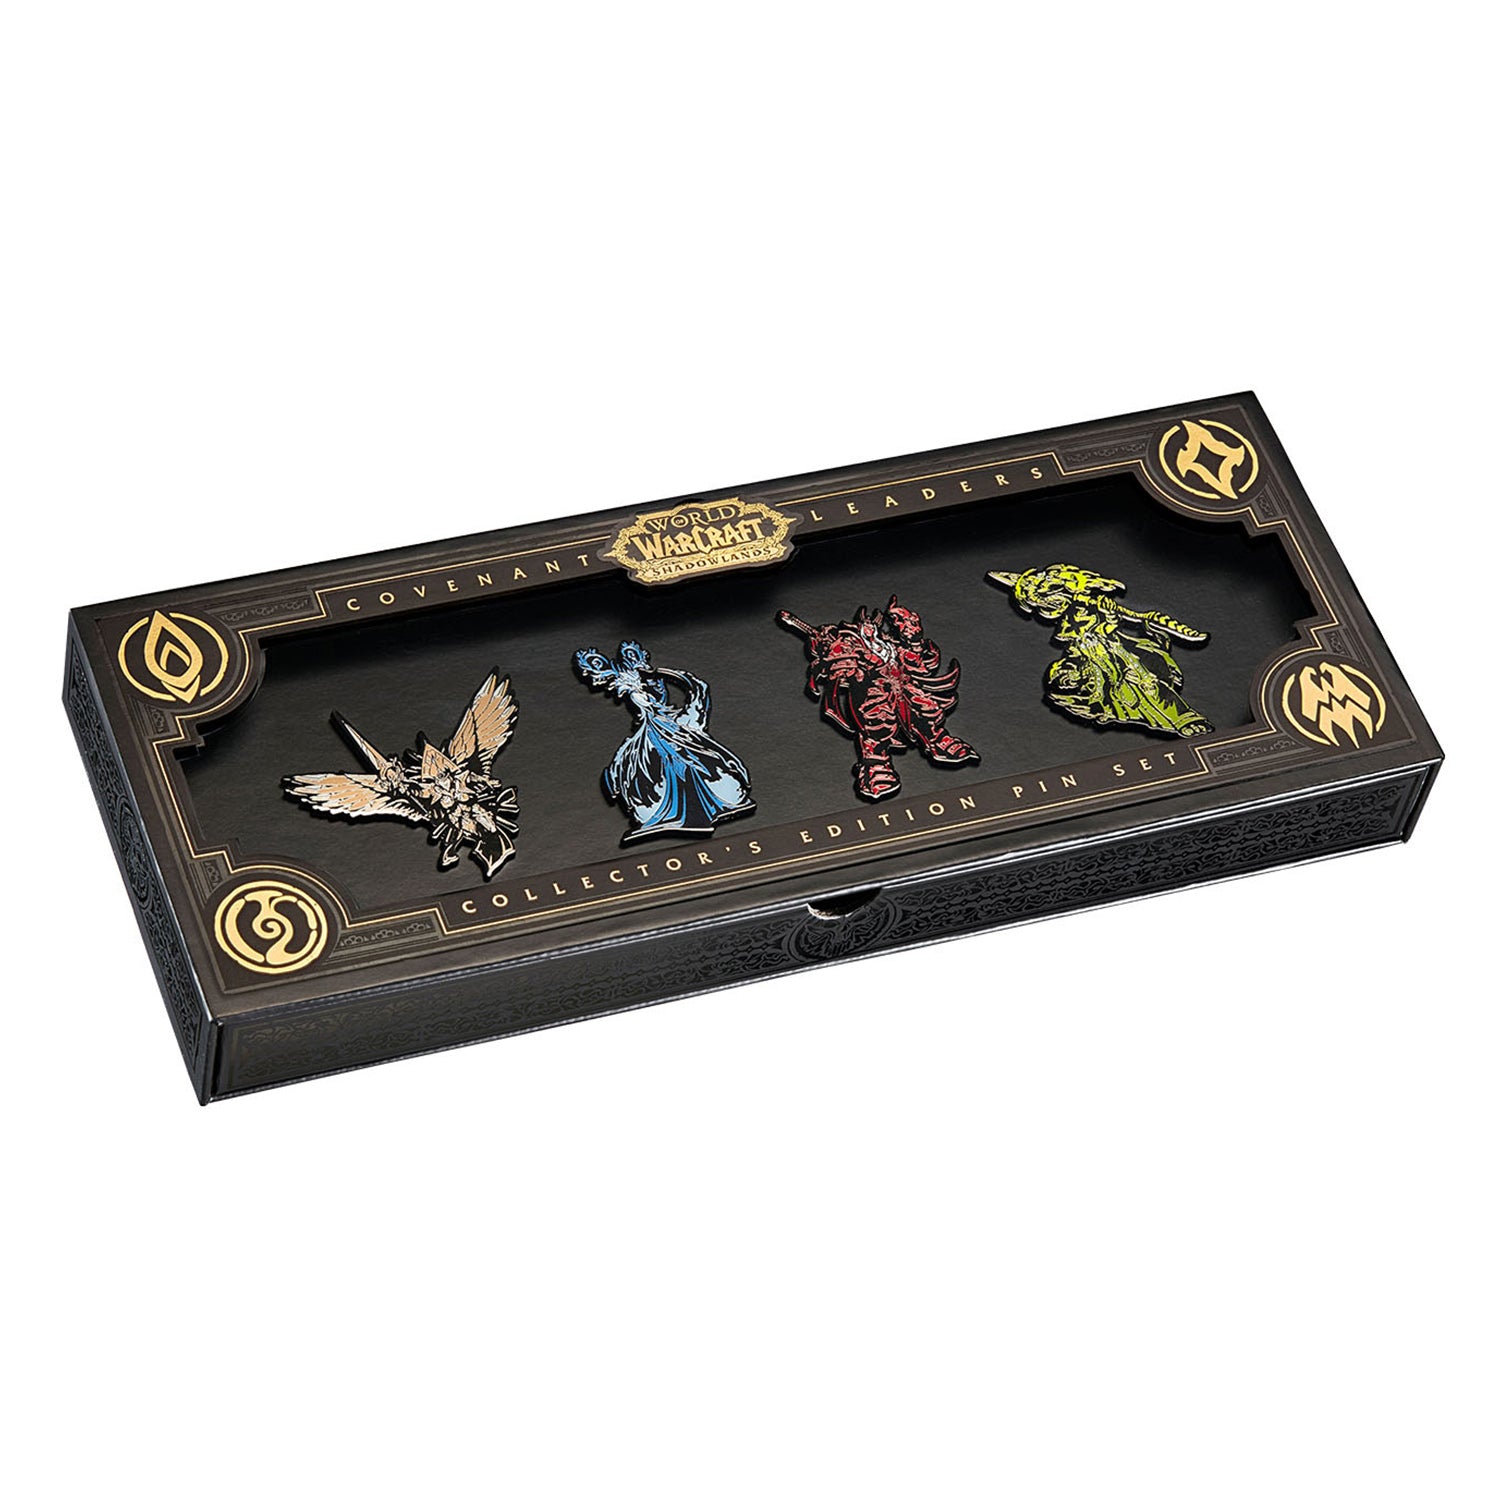 Covenant Leaders Collector's Edition Pin Set